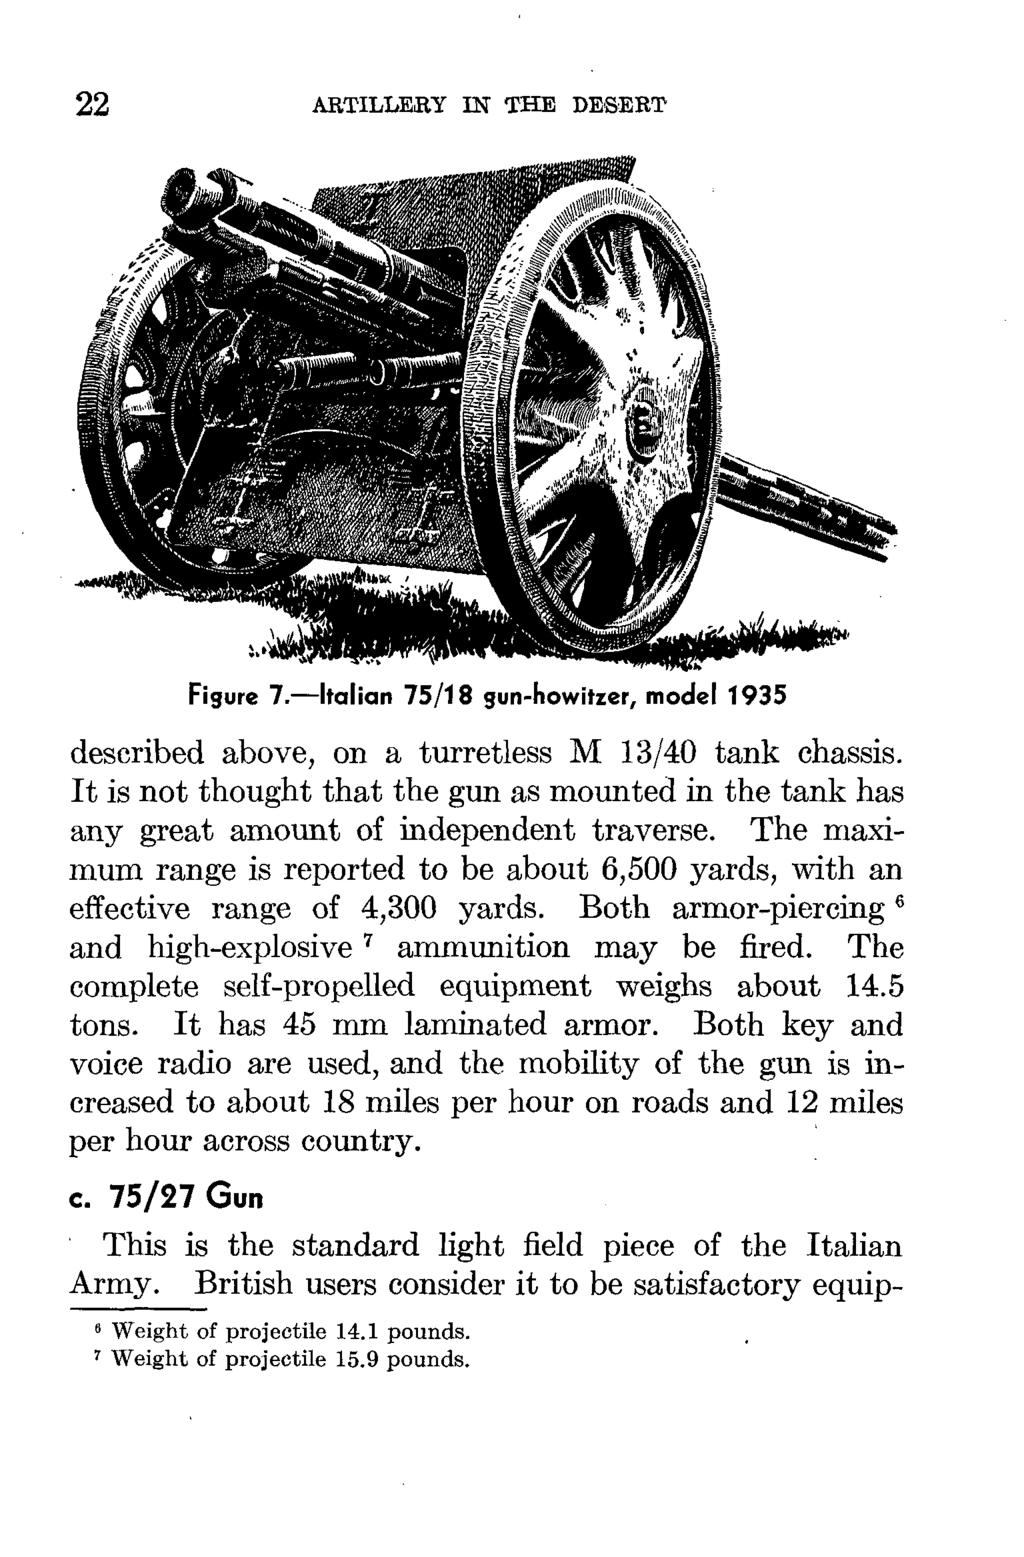 22 ARTILLERY IN THE DESERT Figure 7.-Italian 75/18 gun-howitzer, model 1935 described above, on a turretless M 13/40 tank chassis.